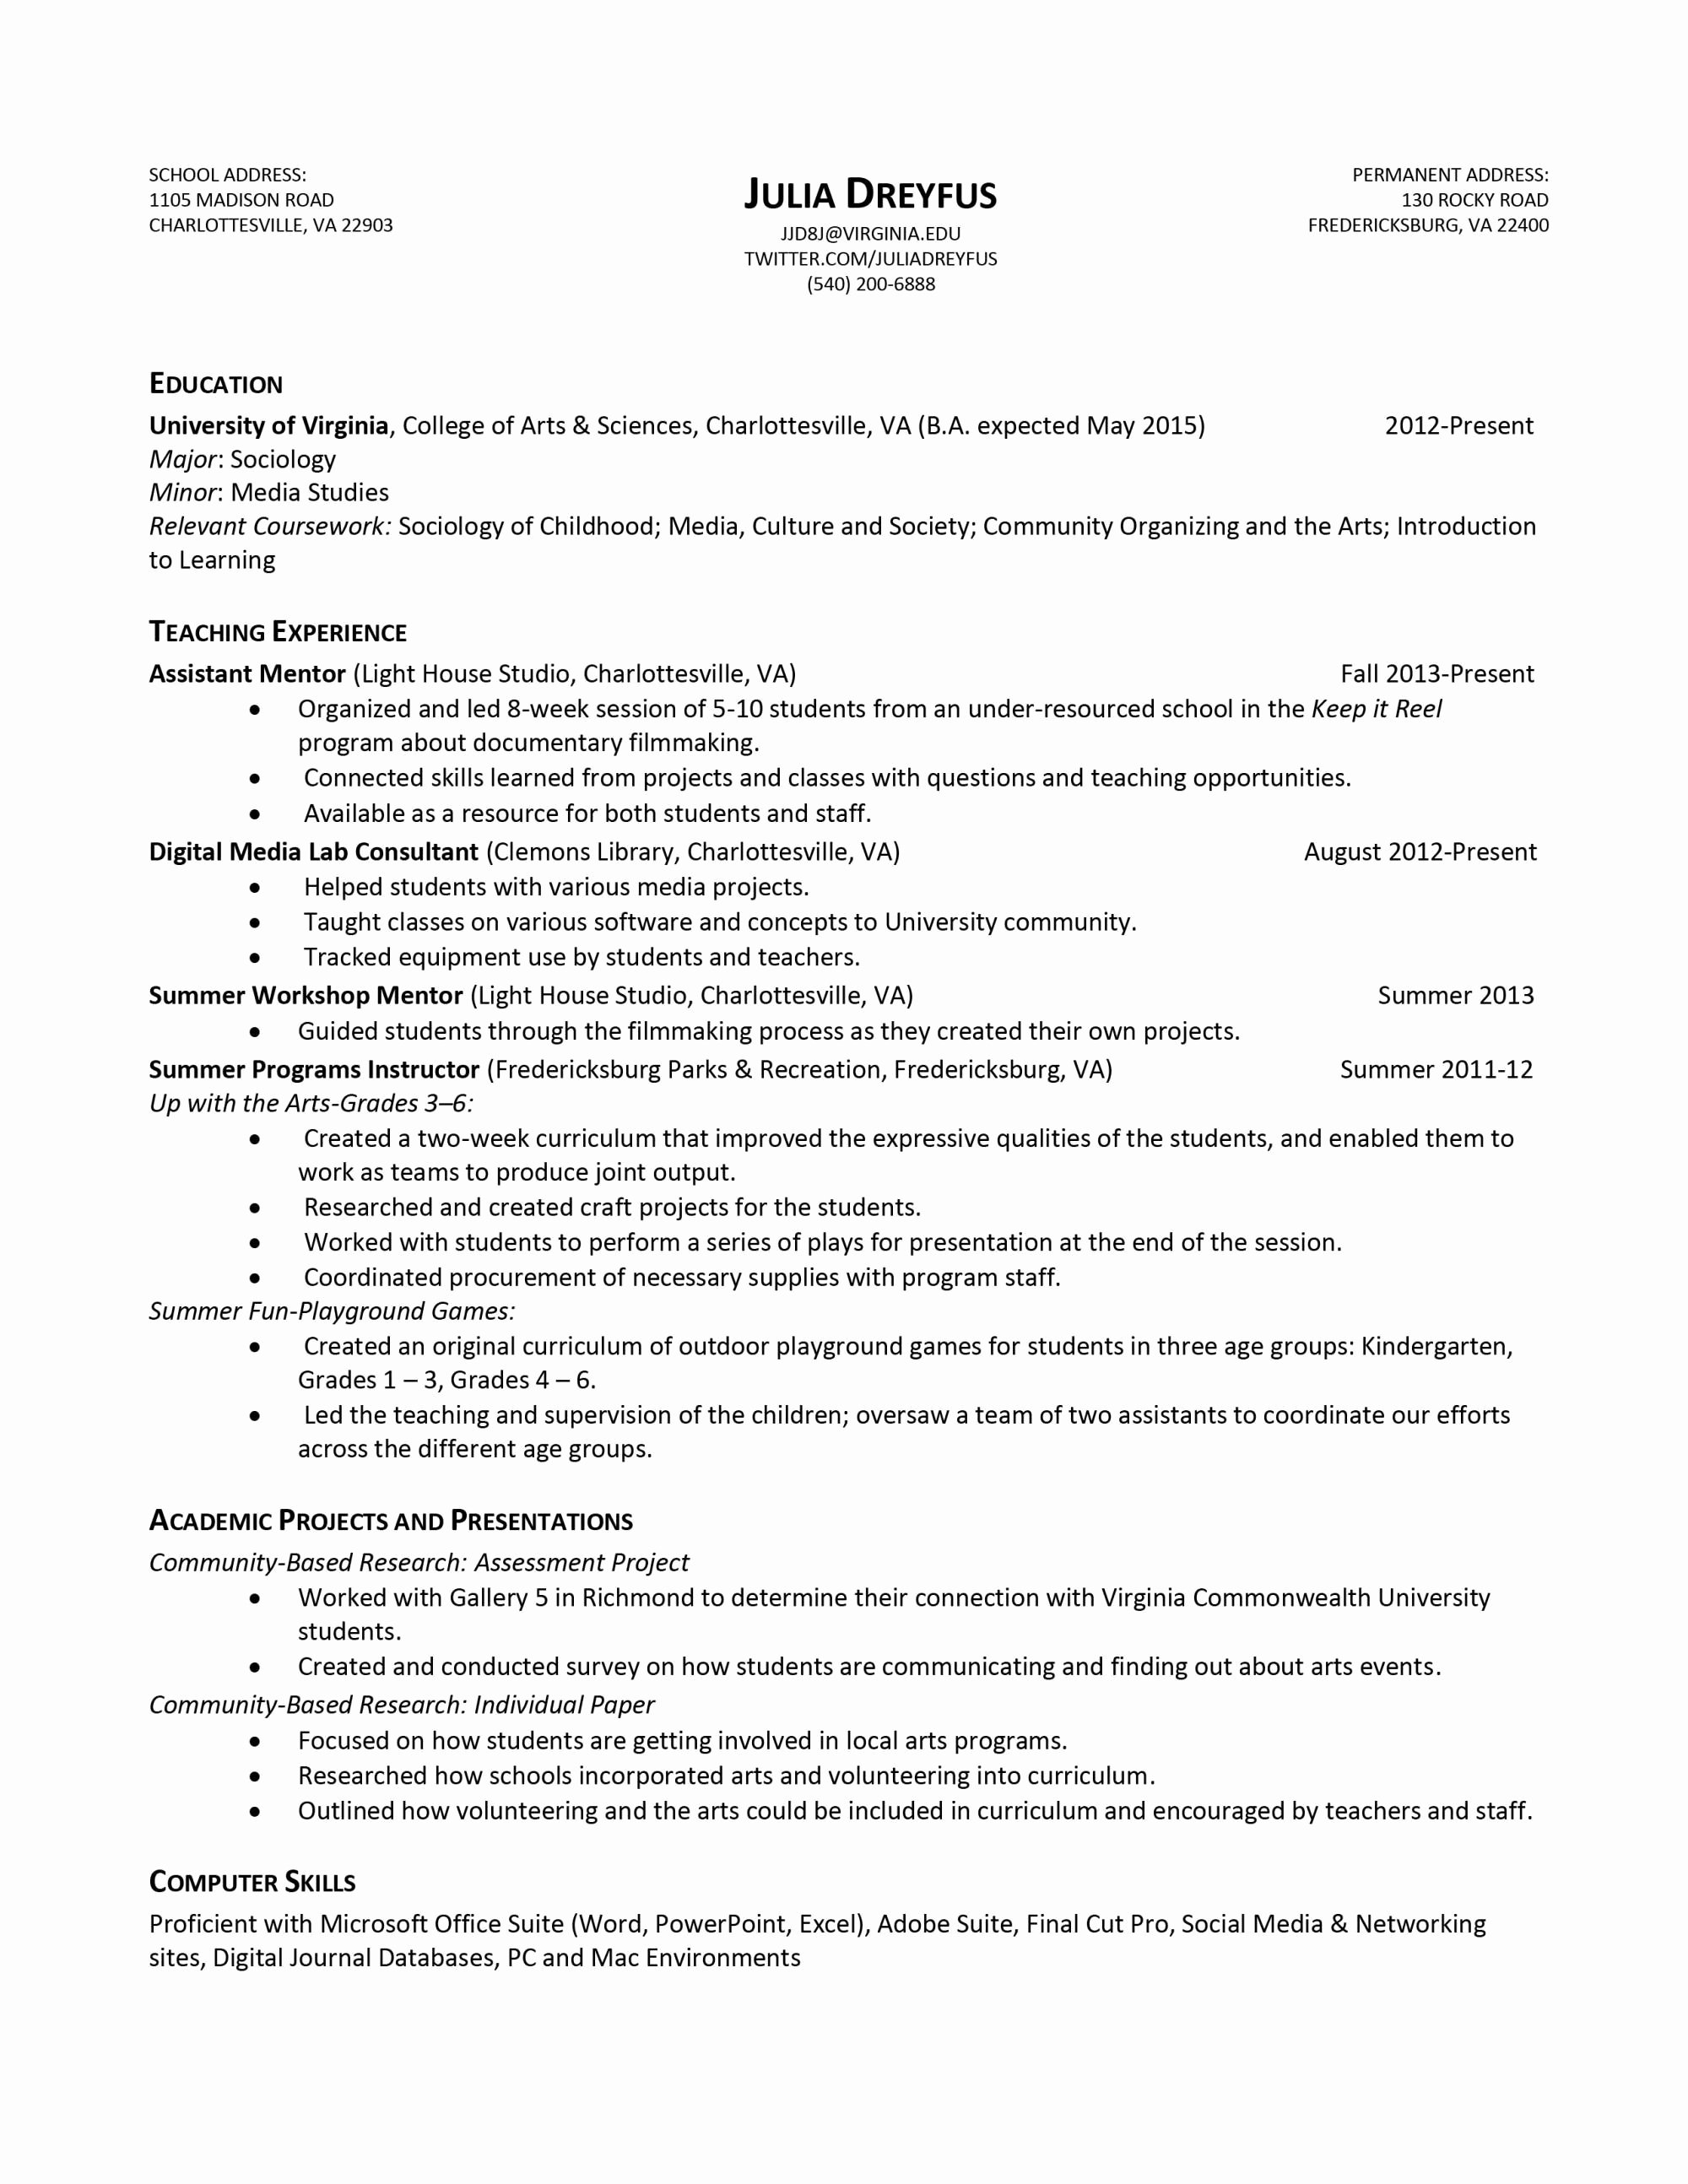 Federal Resume Template Word Awesome Federal Cover Letter Template Editable Microsoft Word